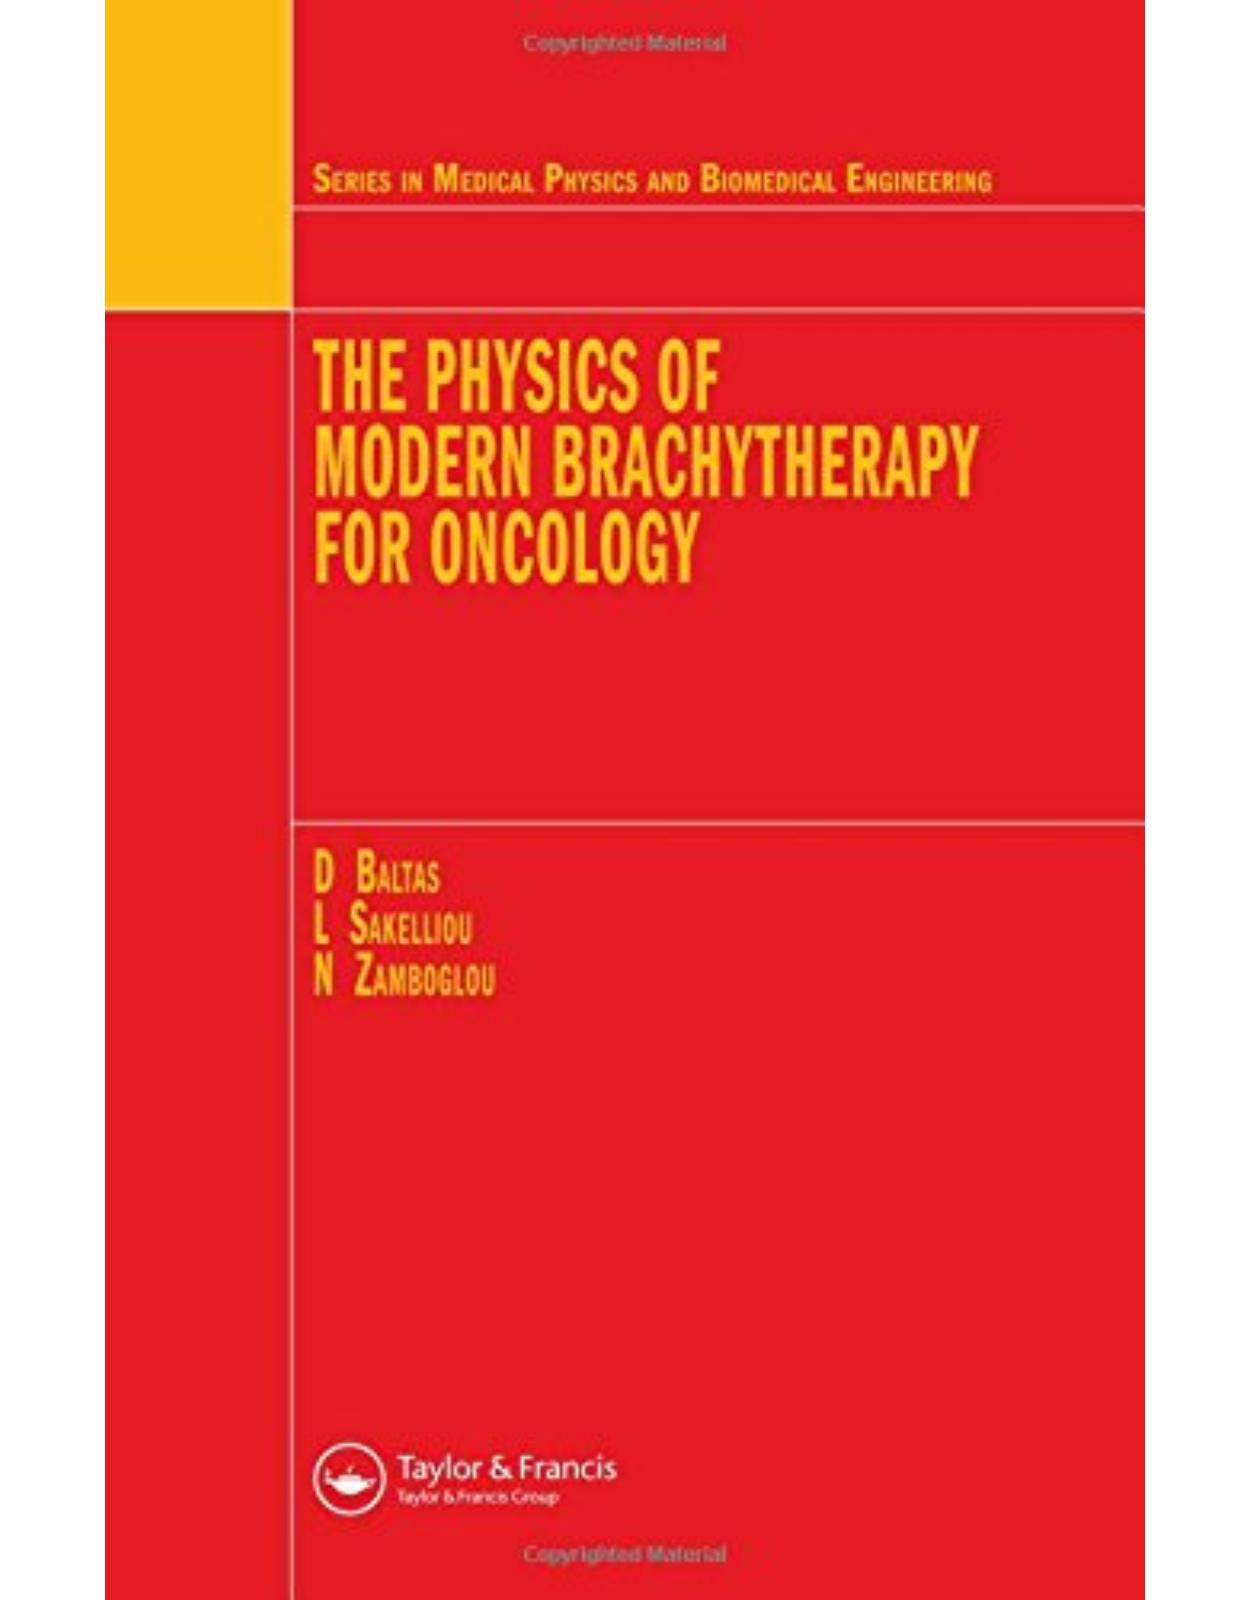 The Physics of High Dose Rate Brachytherapy